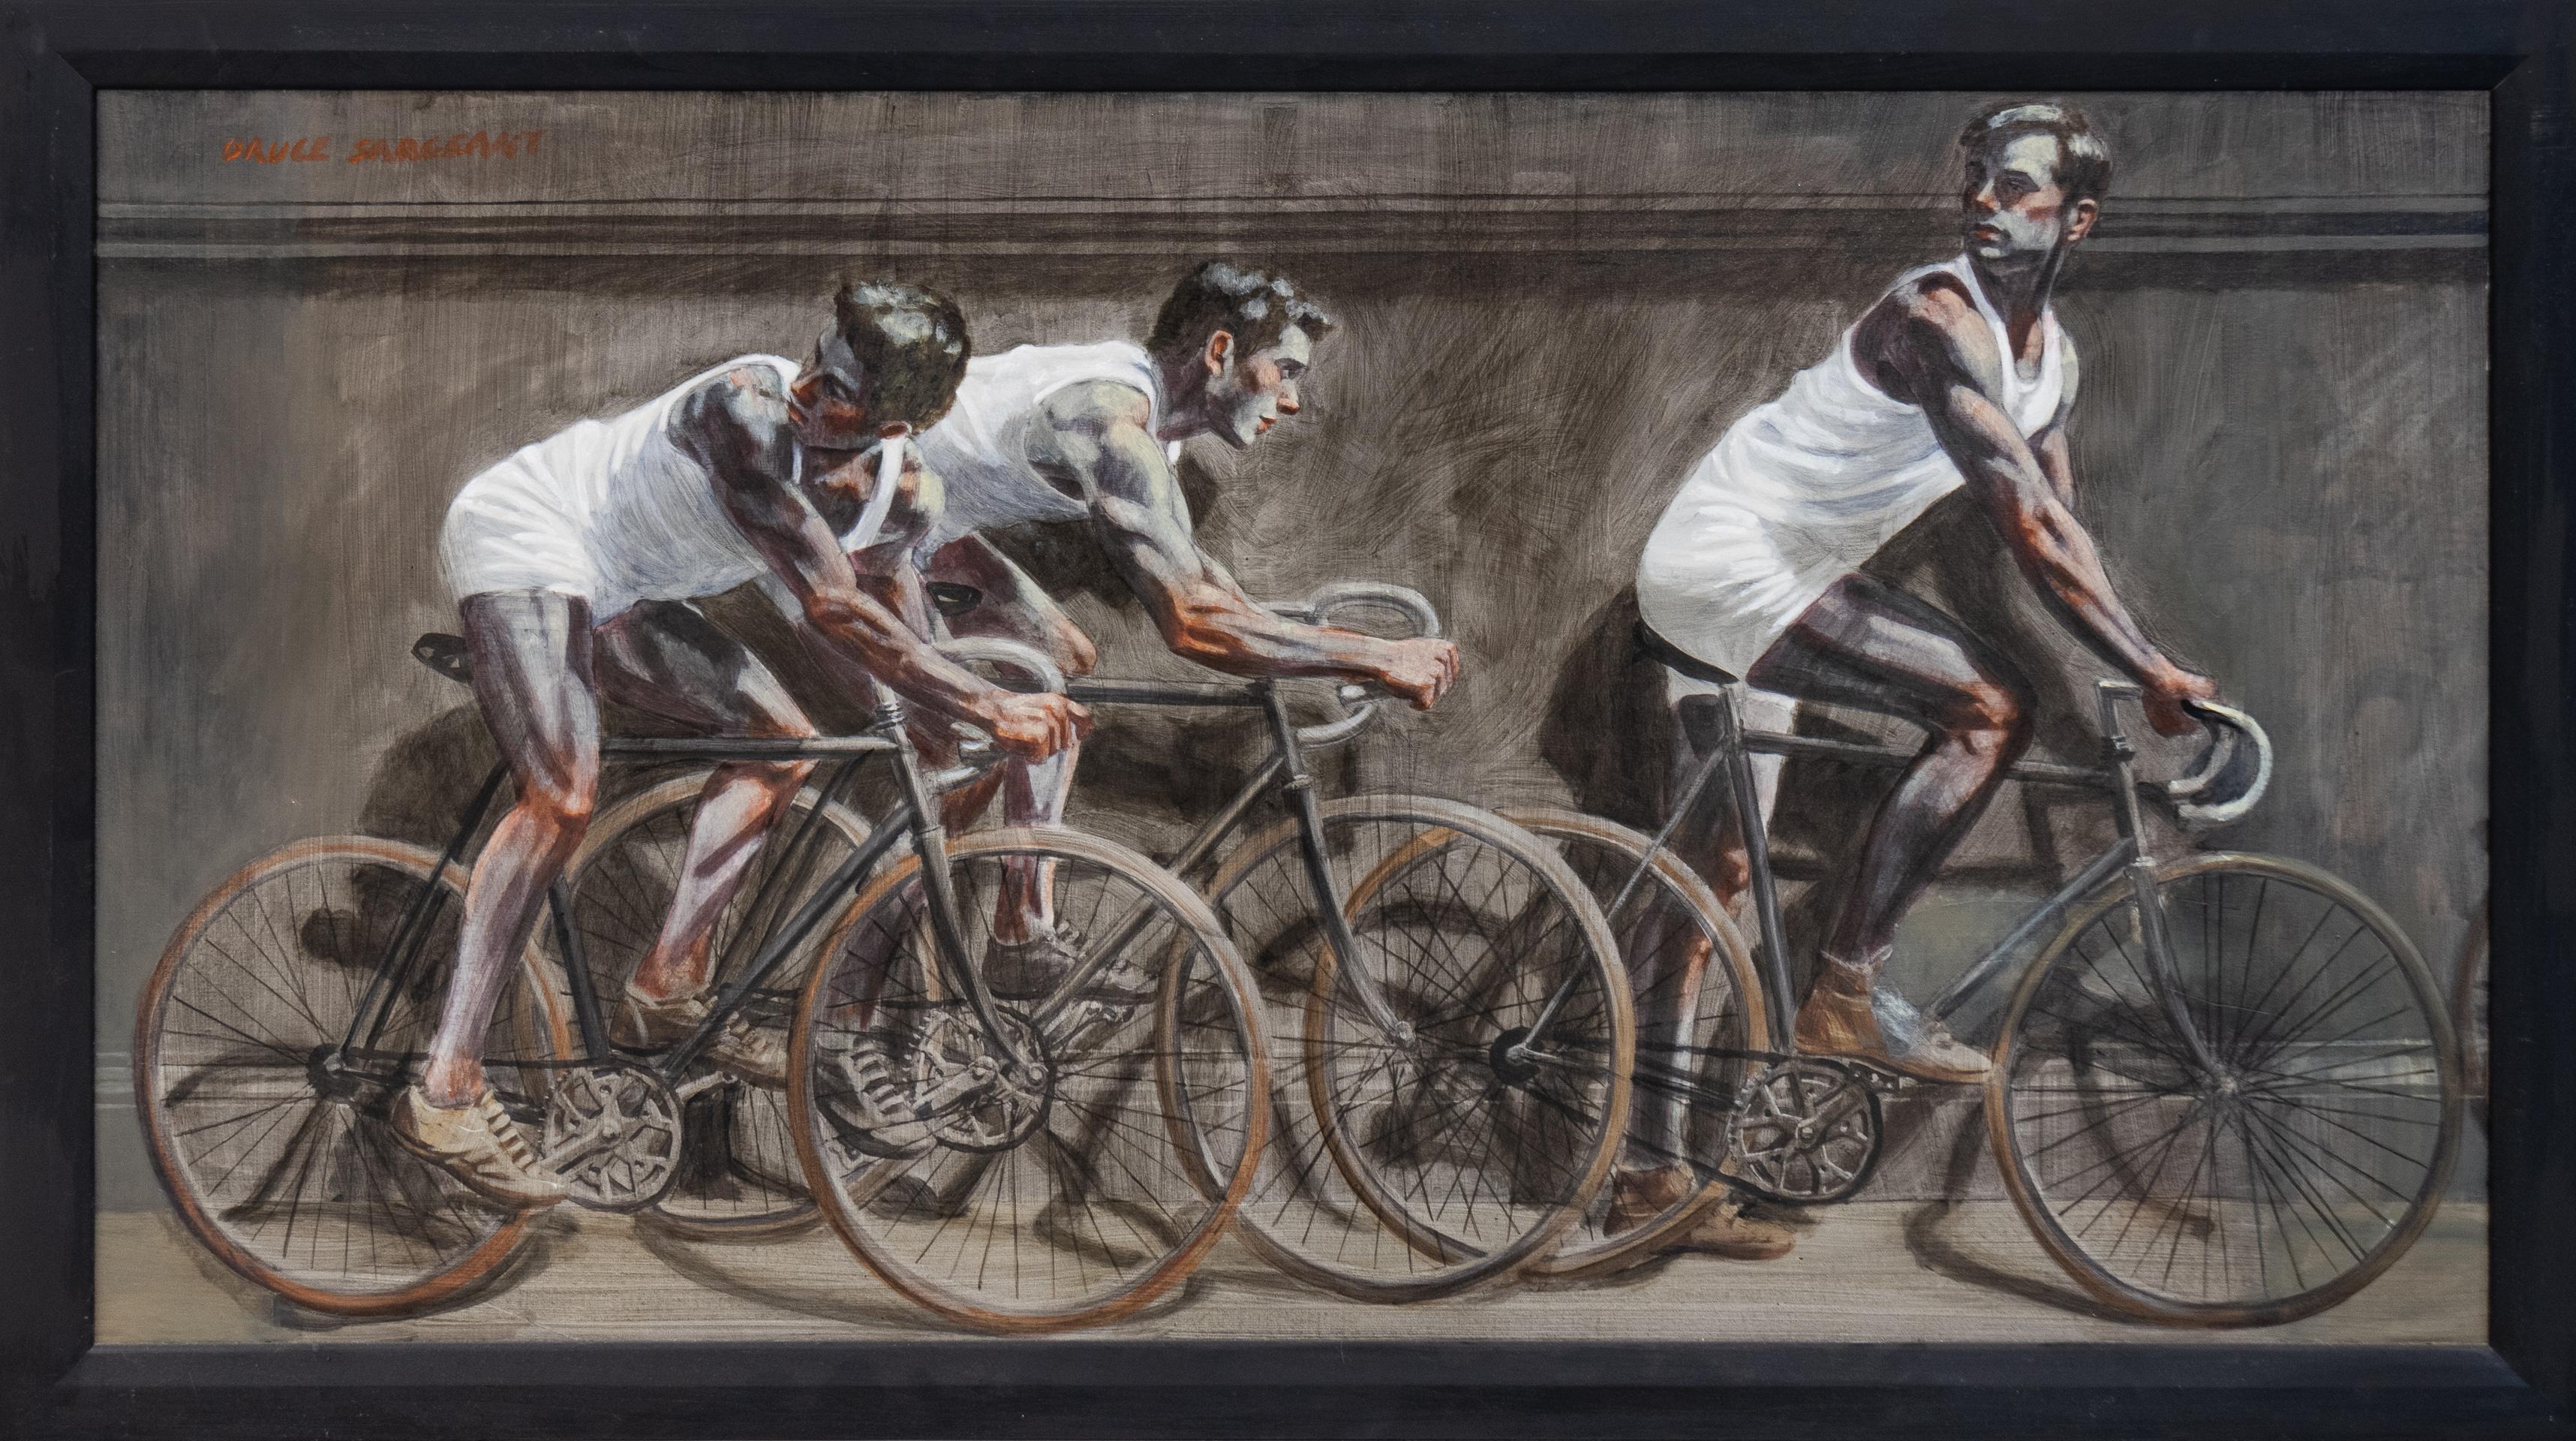 [Bruce Sargeant (1898-1938)] Group of Cyclists